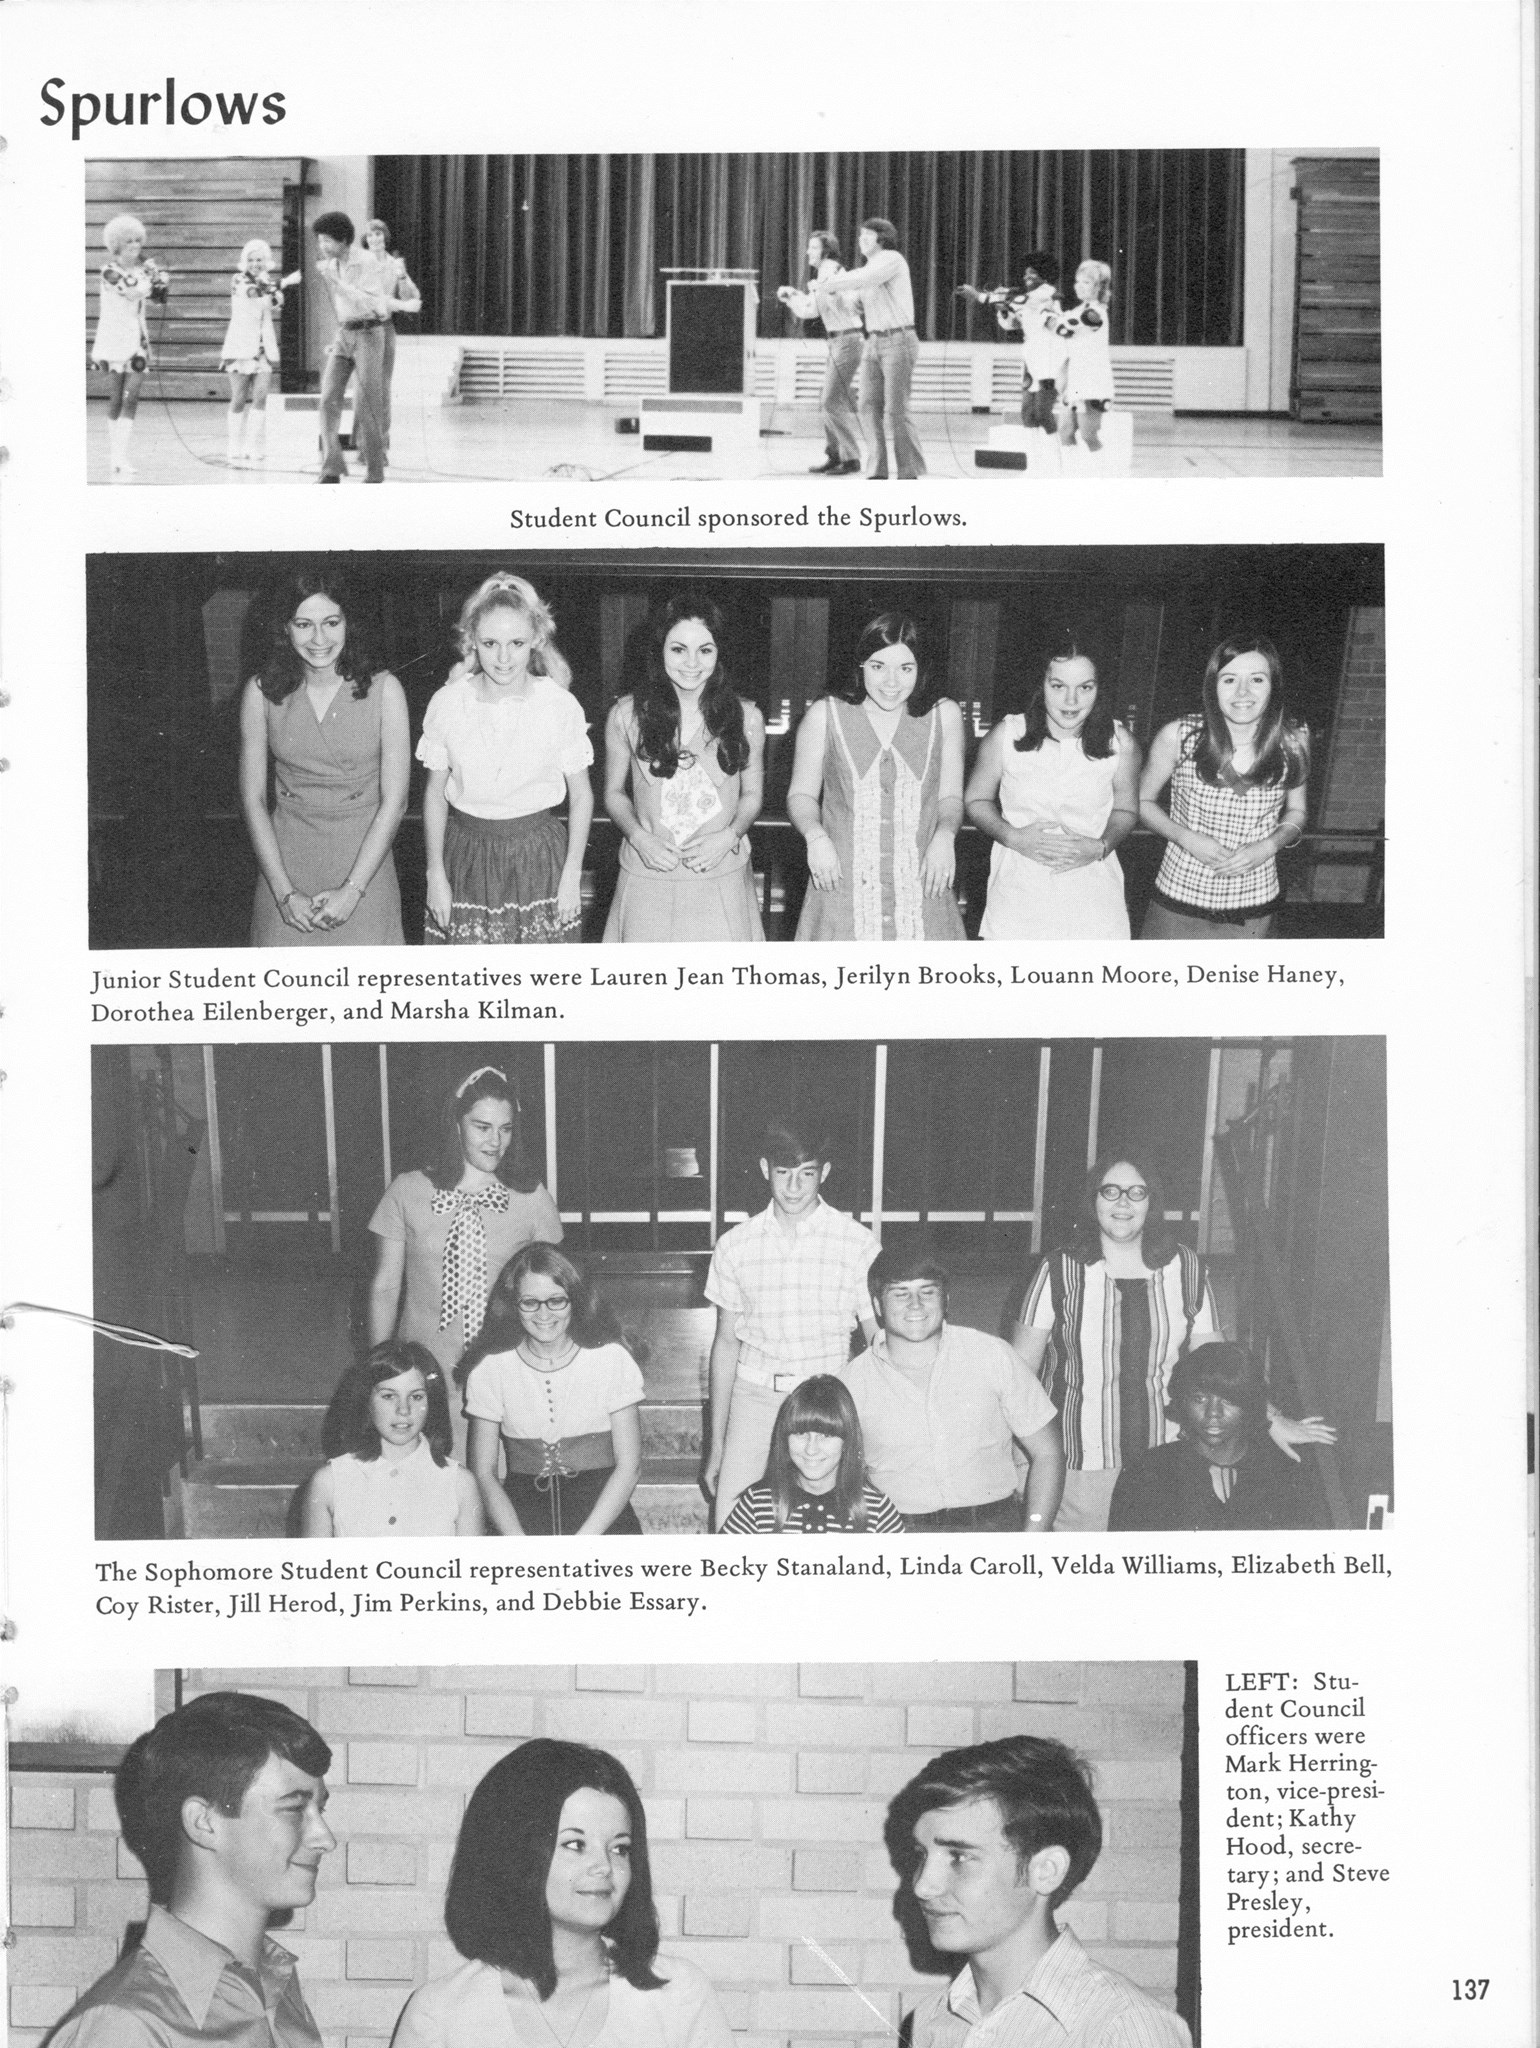 ../../../Images/Large/1971/Arclight-1971-pg0137.jpg